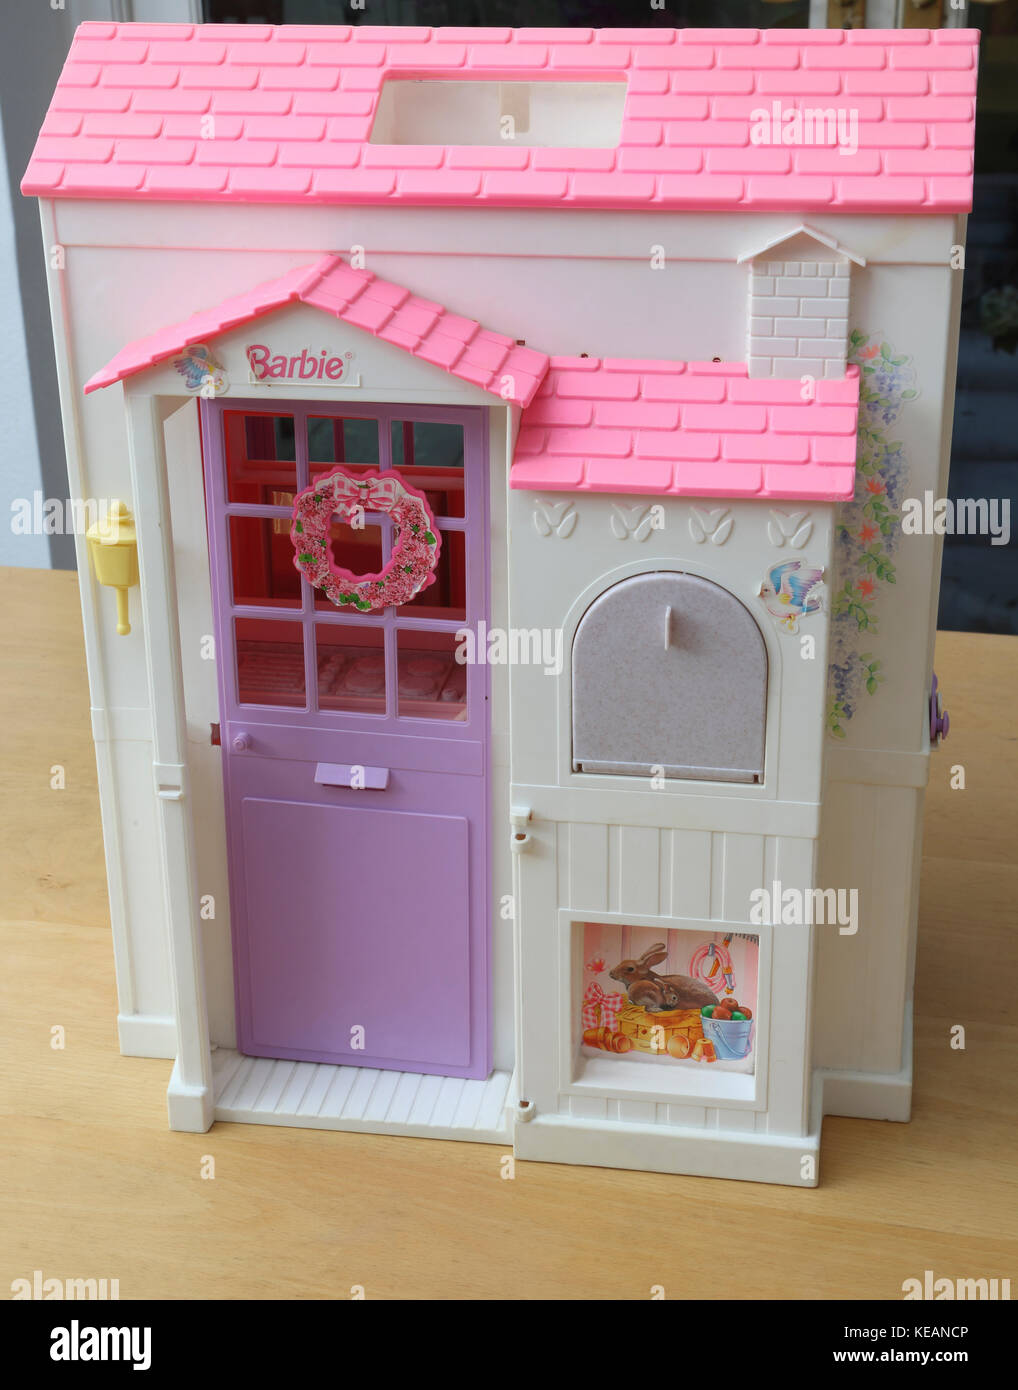 Barbie House High Resolution Stock Photography and Images - Alamy